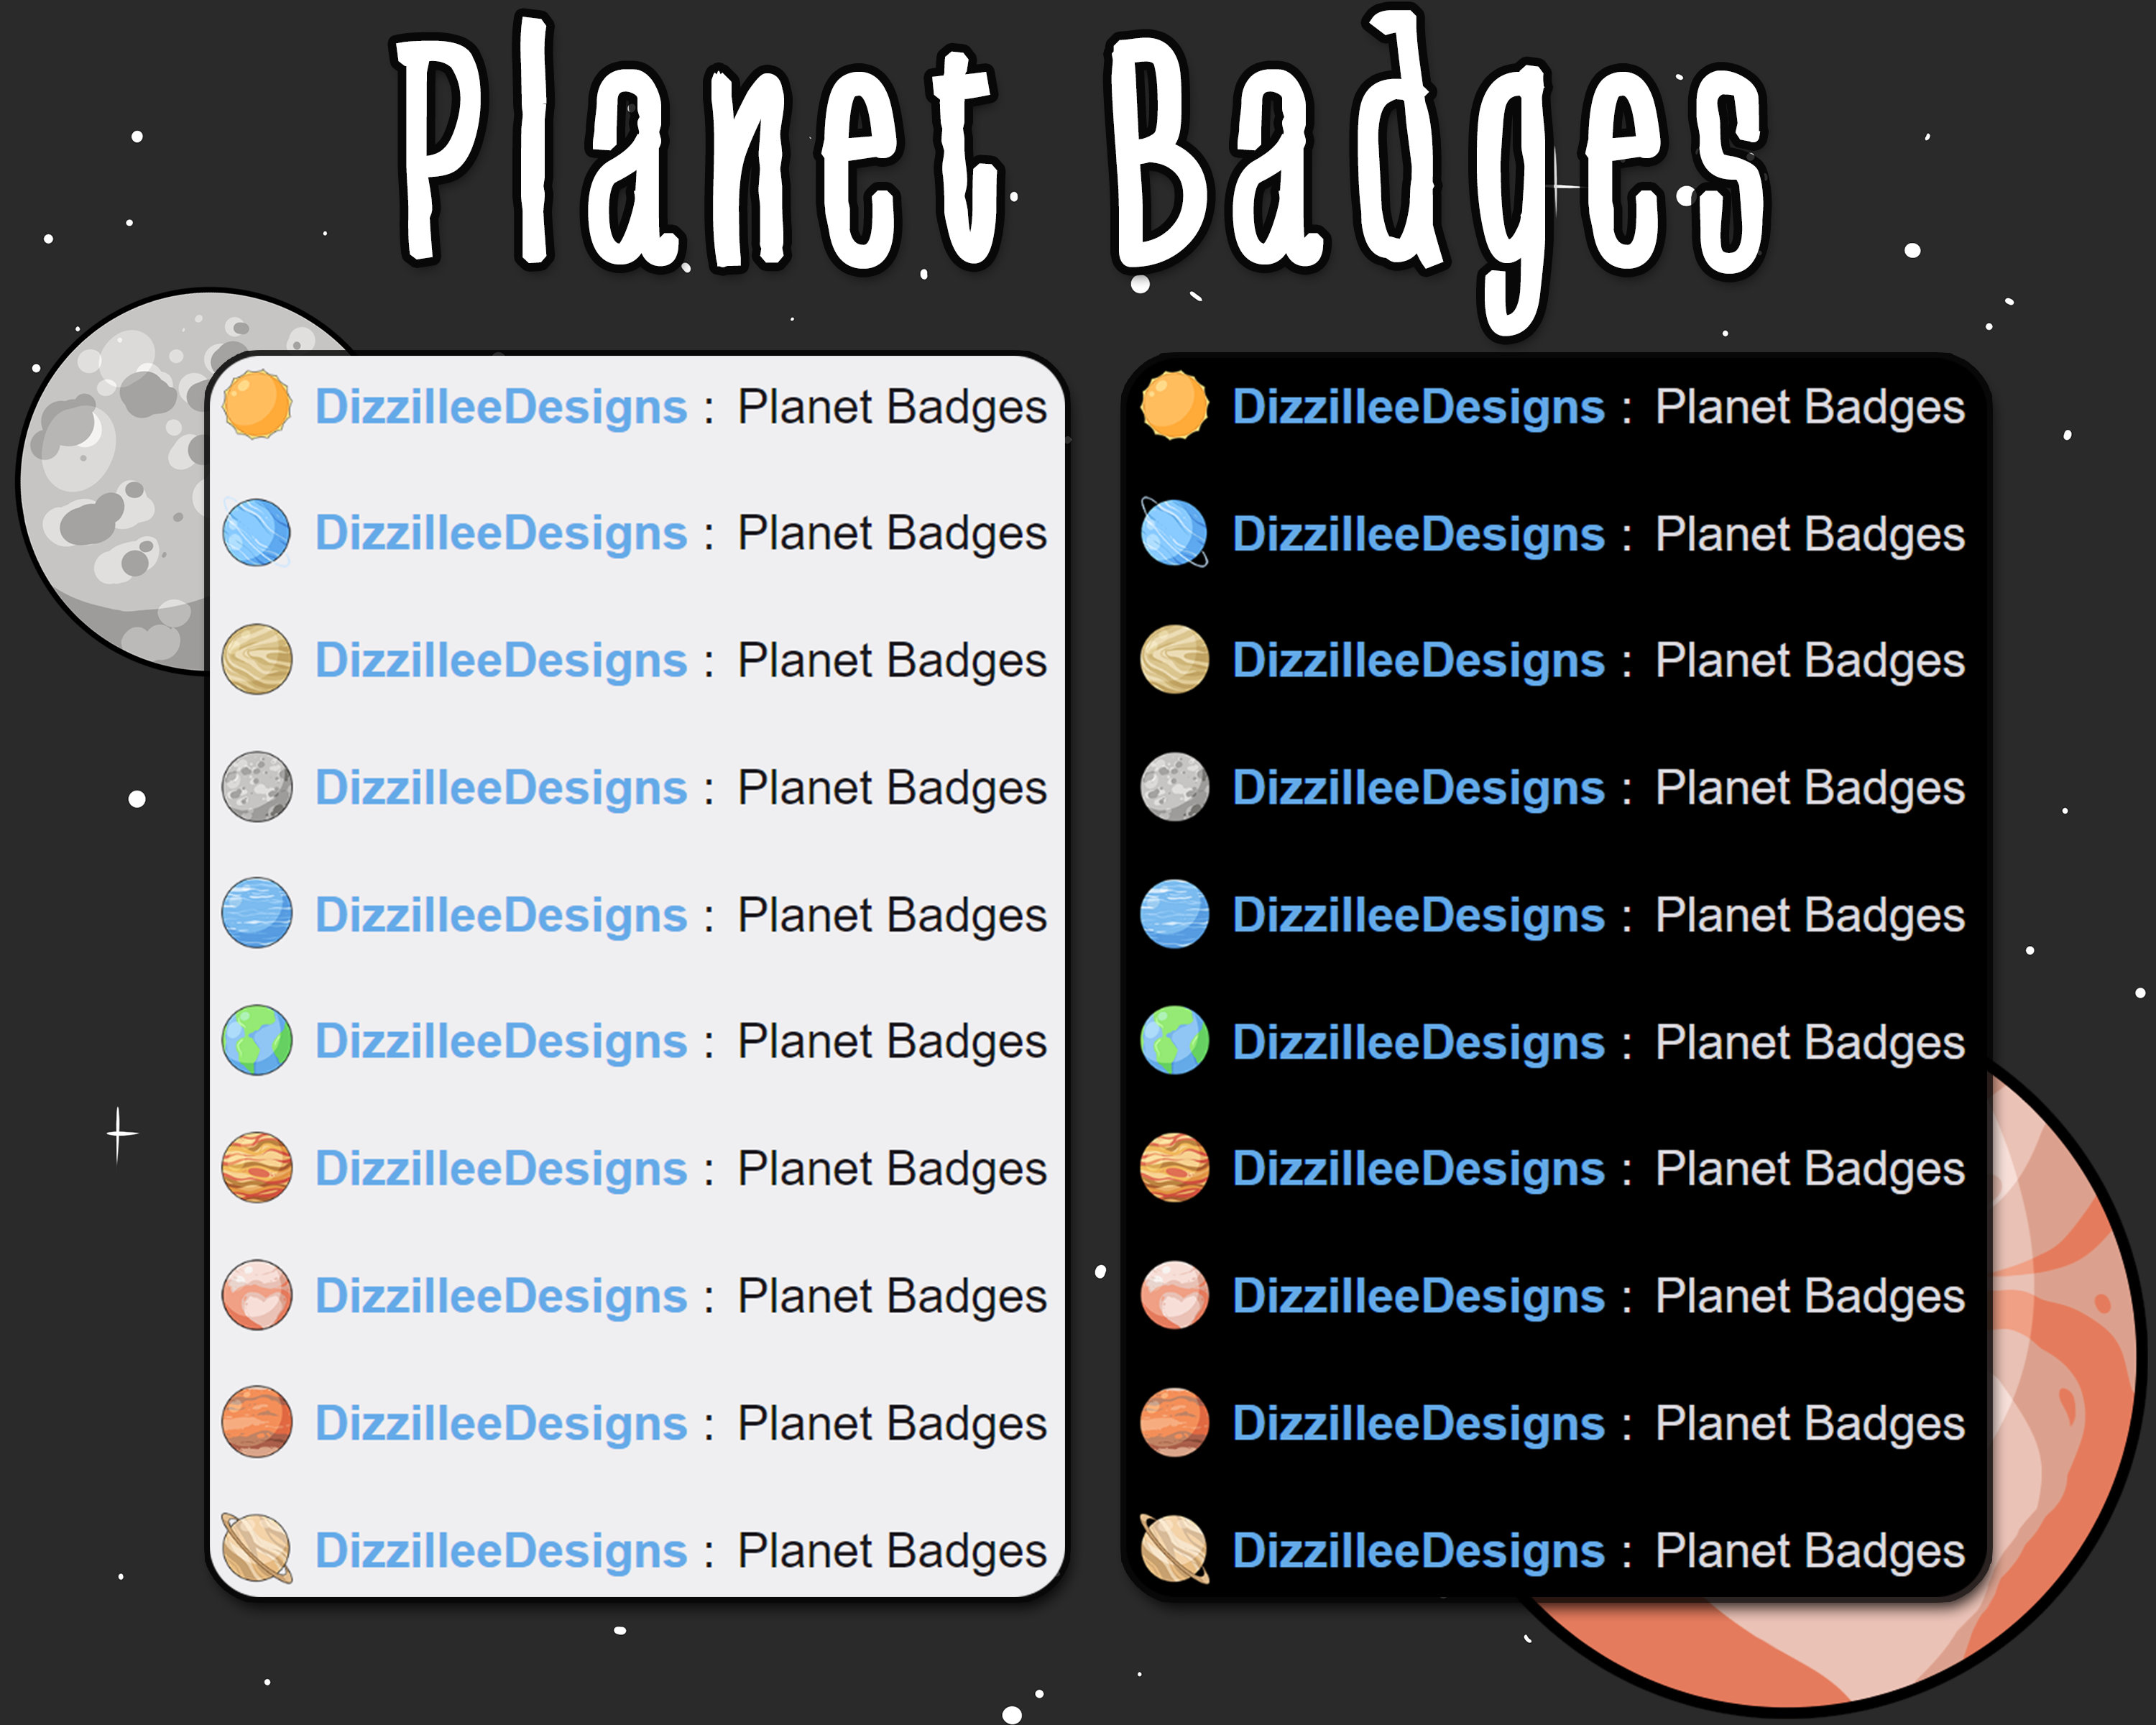 I understand most of the badges, but what's that green virus-looking one?  🤔🦠 : r/Twitch